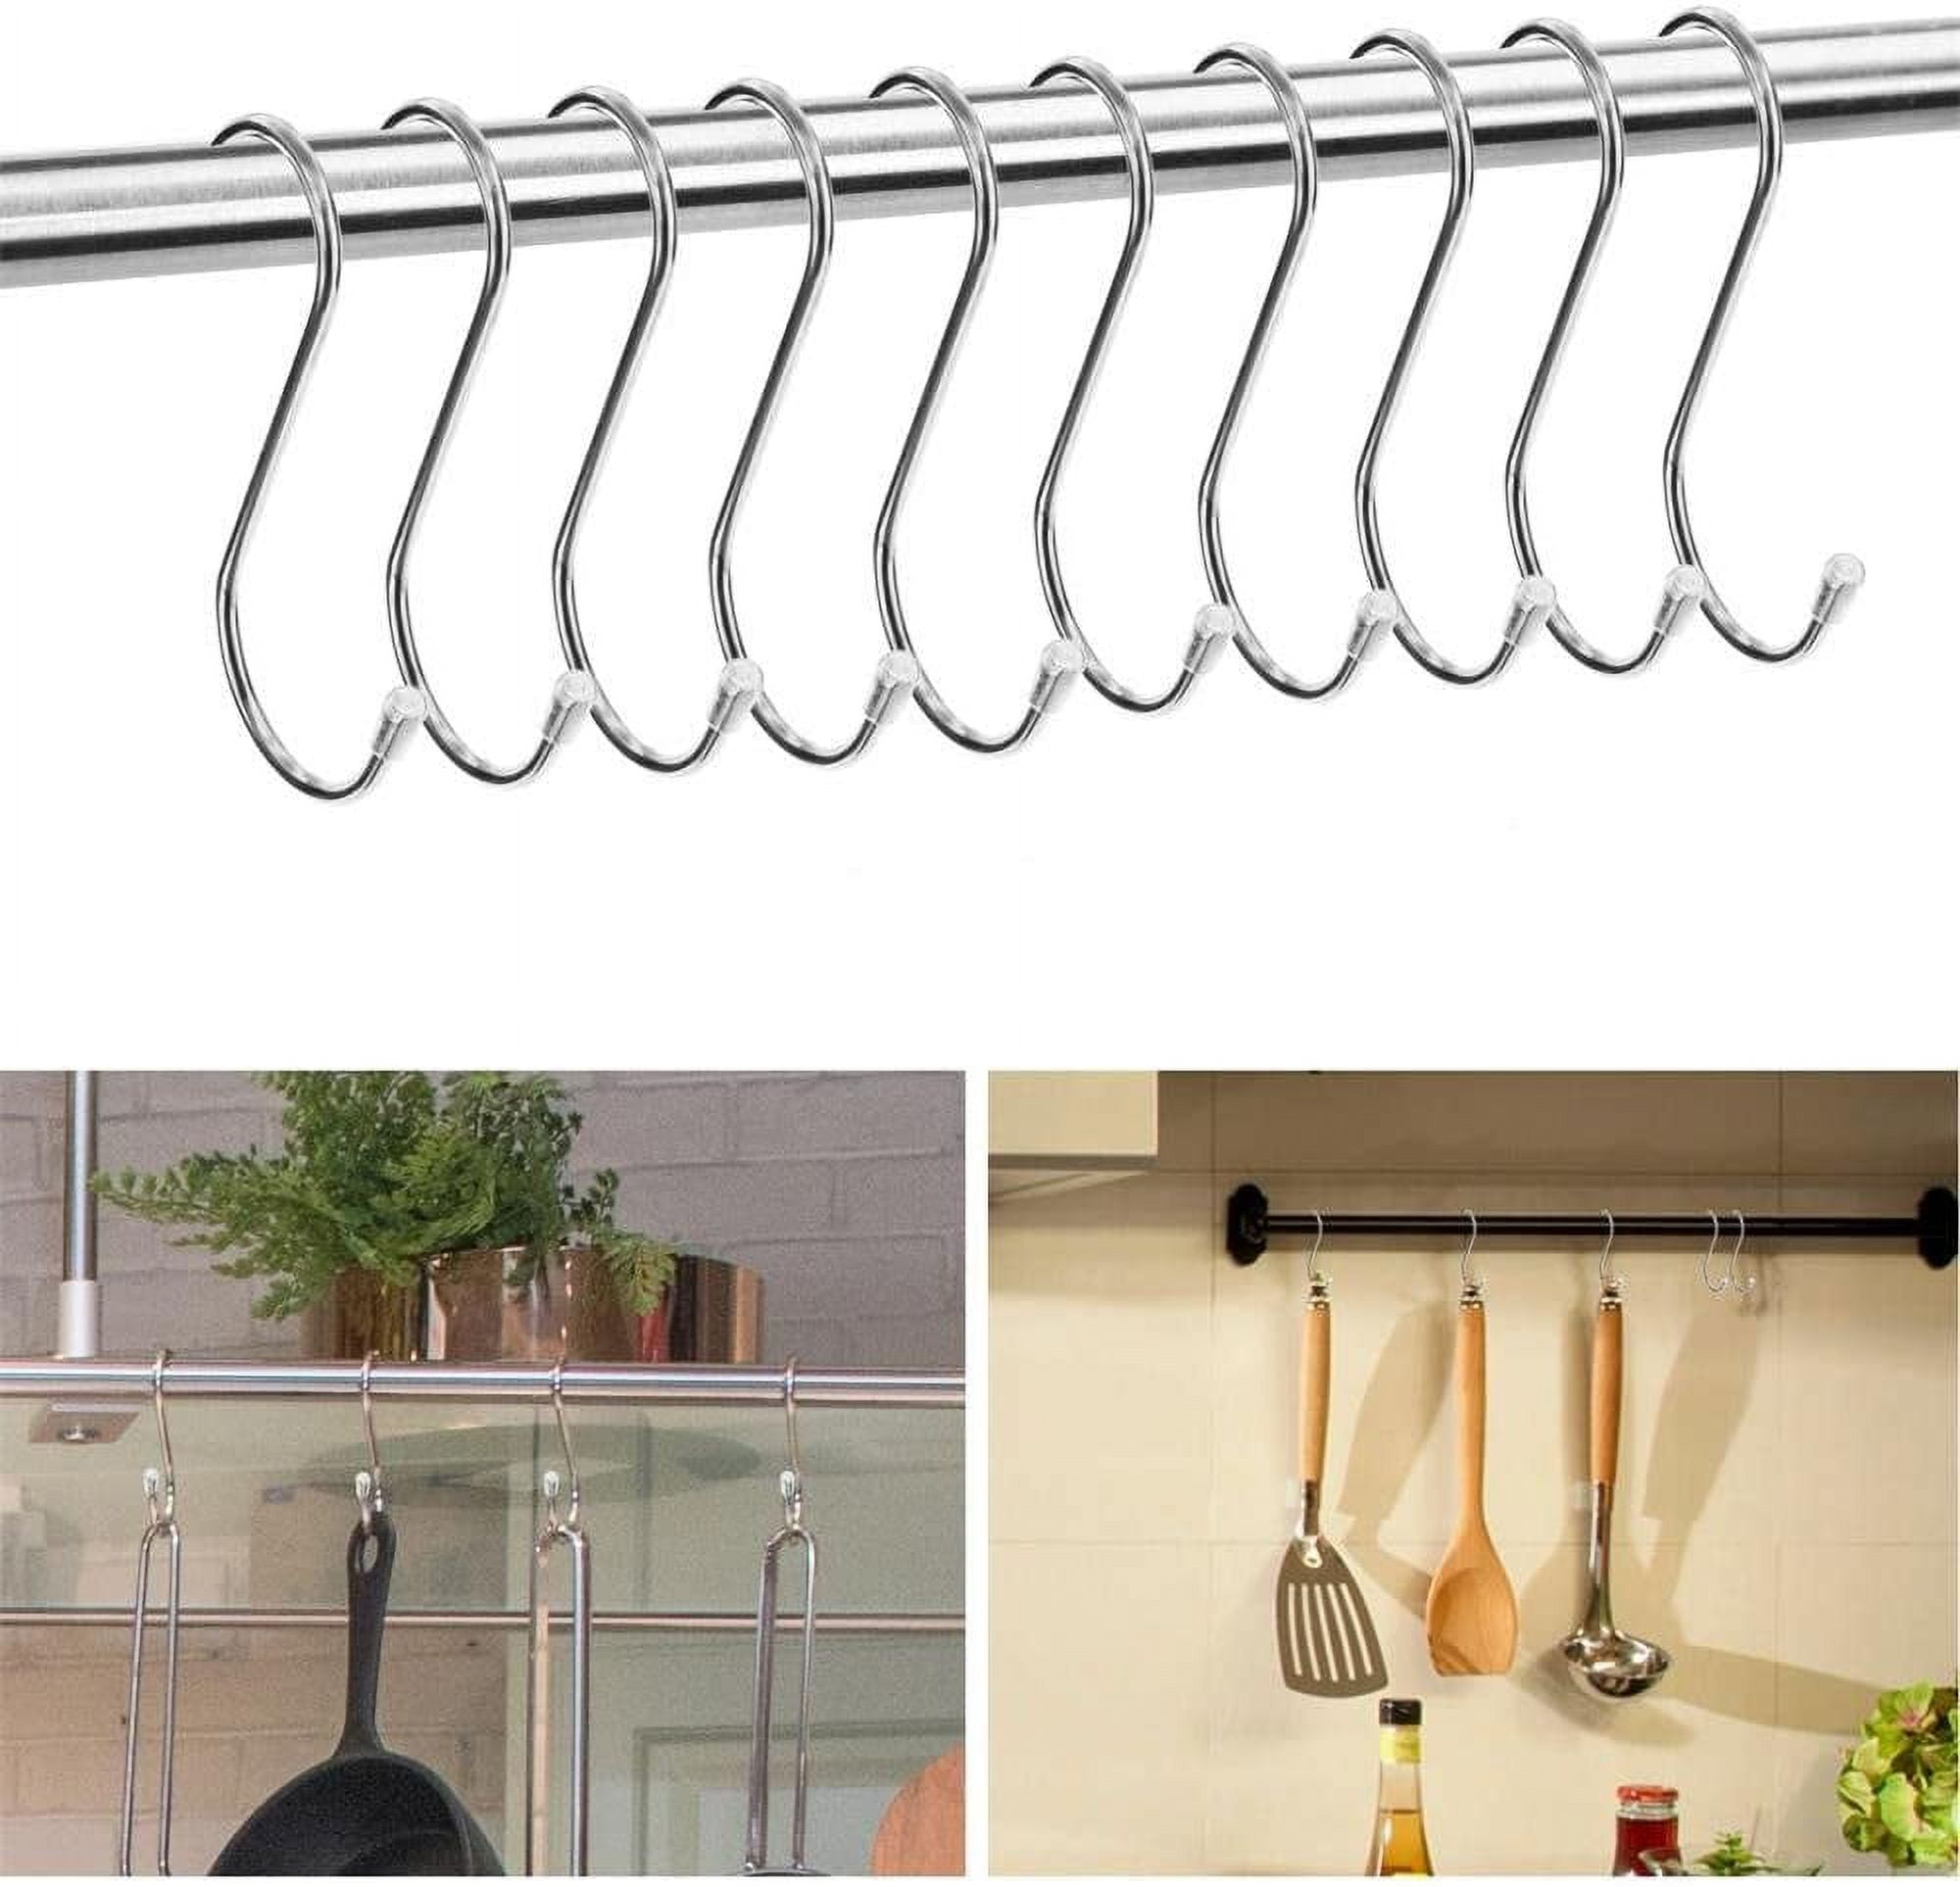 Heavy Duty S Hooks, Stainless Steel S Shaped Hooks for Hanging Kitchenware  Pan Pots Utensils Closet Clothes Bags Towels Plants Kitchen Hooks Hanger, 3  inch(10 PCS) 